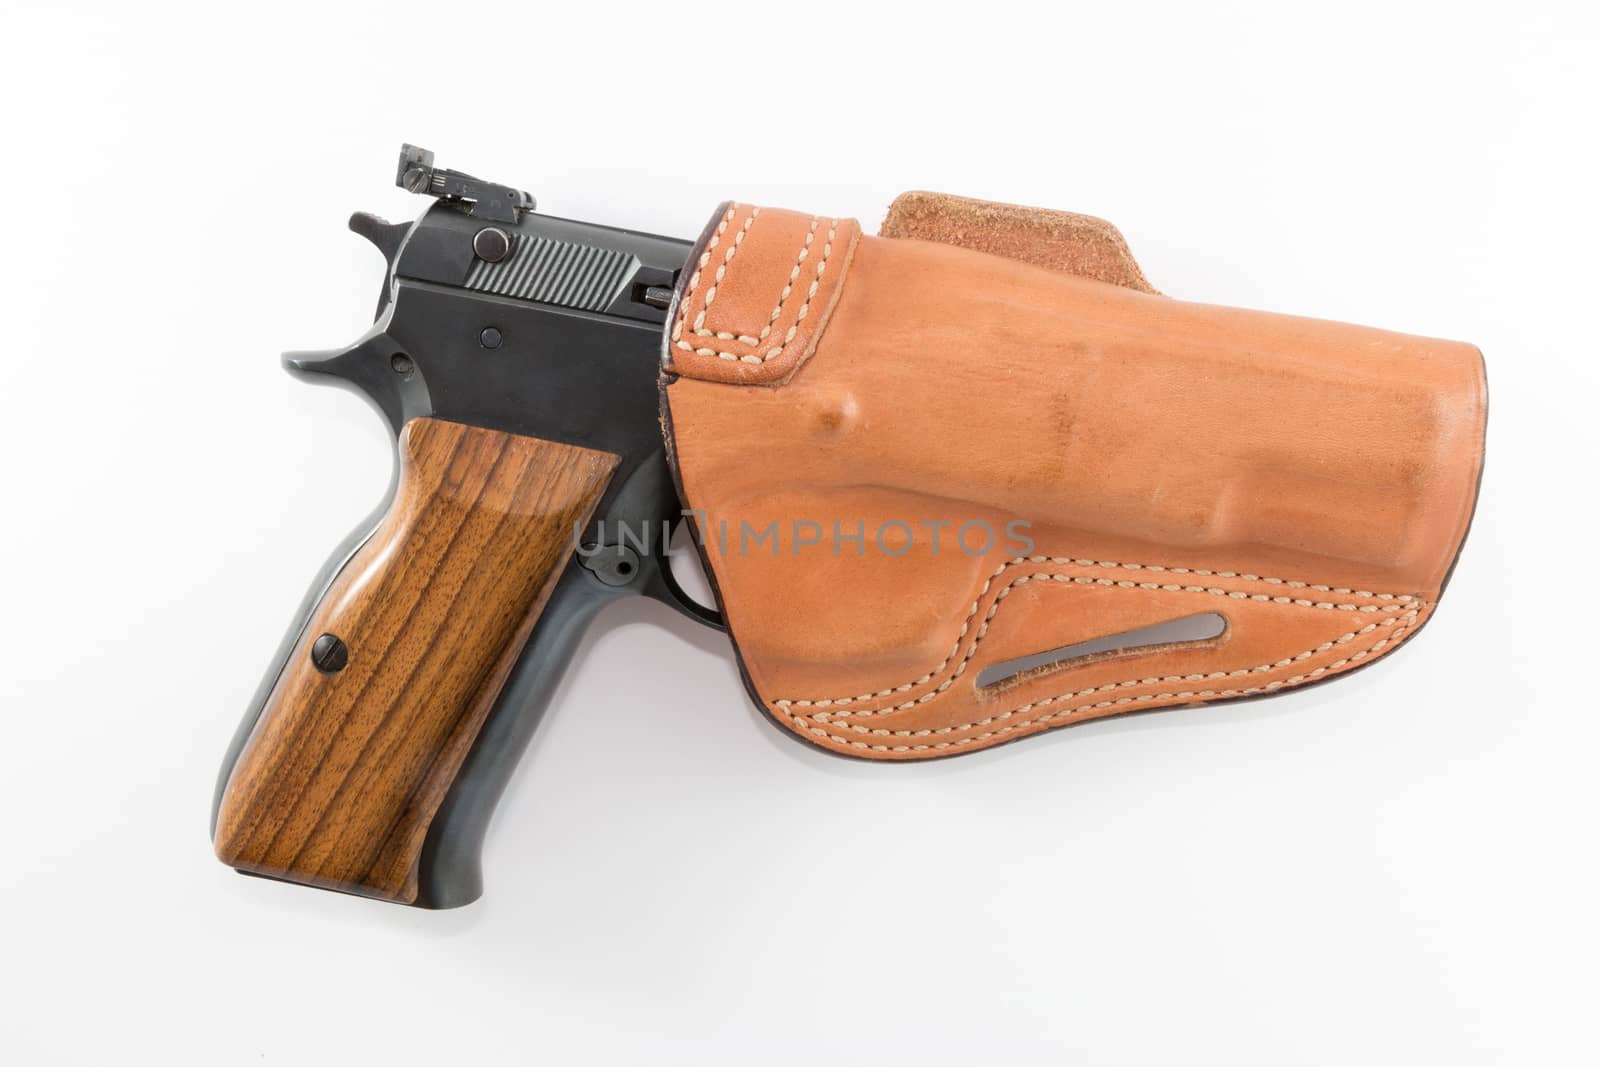 9mm Parabellum pistol, brown handle with light brown leather holster against white background